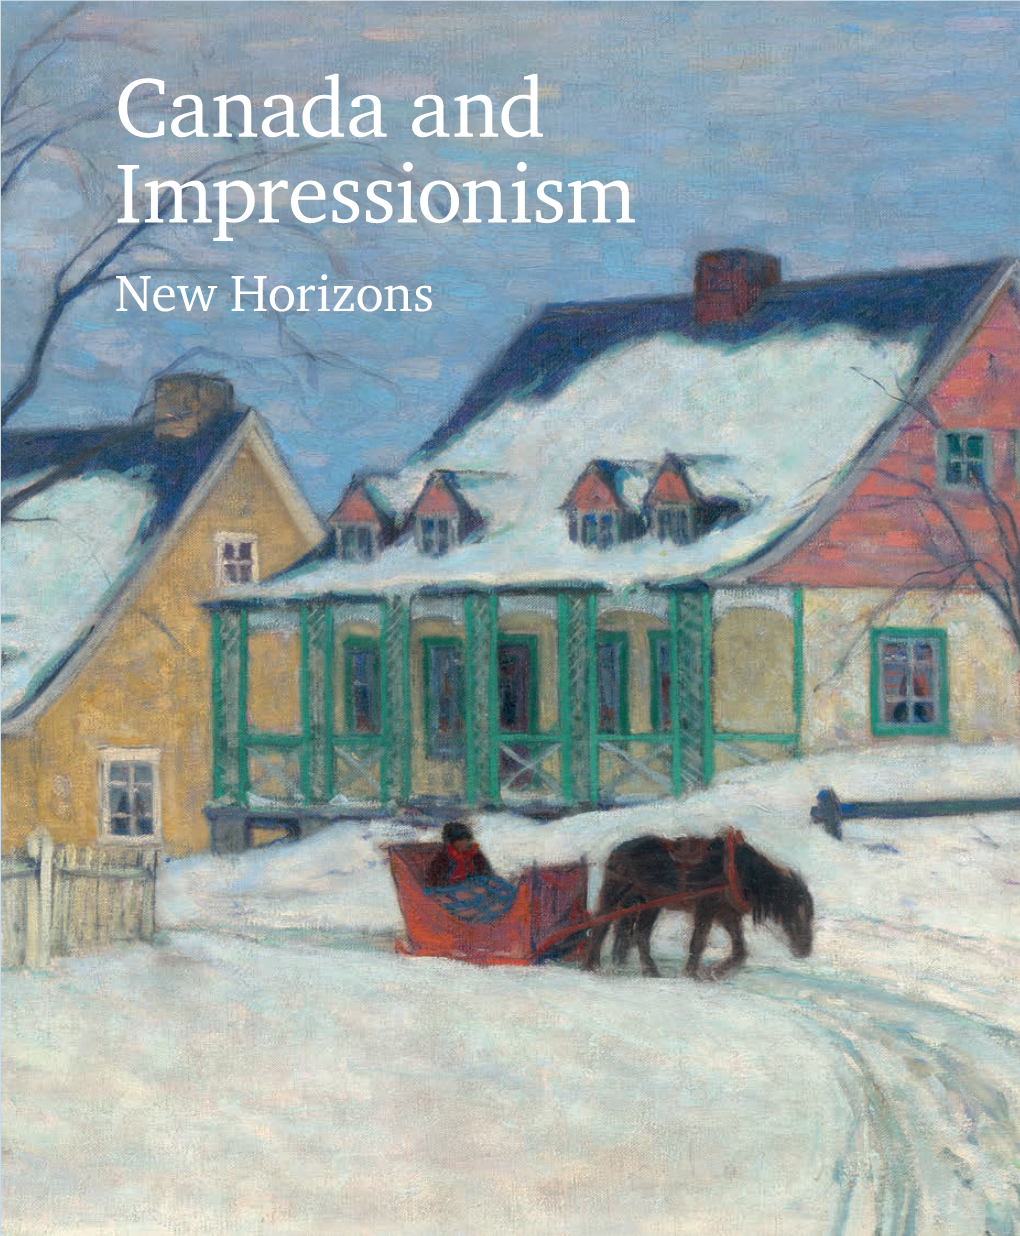 Canada and Impressionism New Horizons New Canada and Impressionism New Horizons